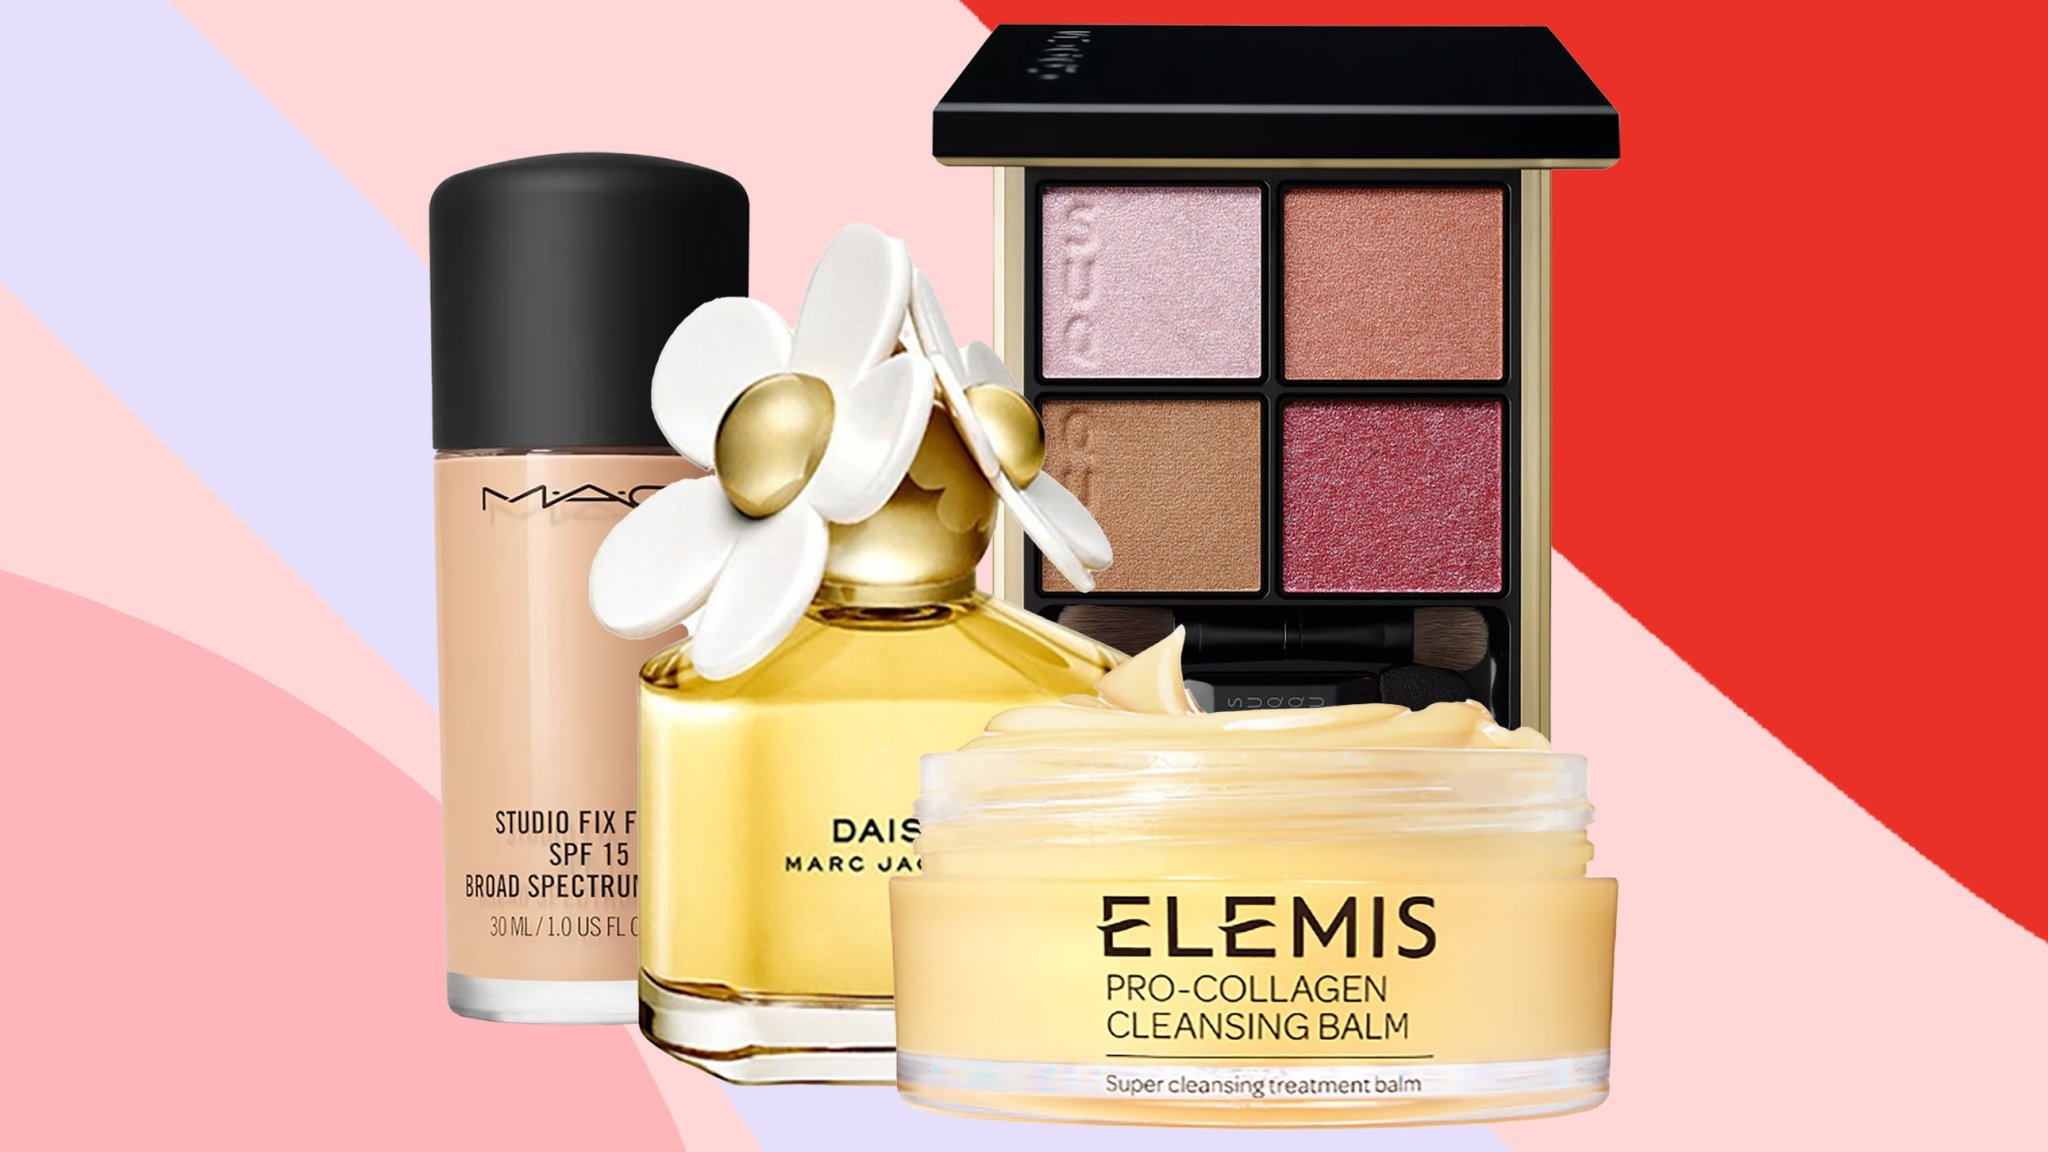 35 best Cyber Monday beauty deals that are still going strong – across makeup, skincare, hair tools & fragrance